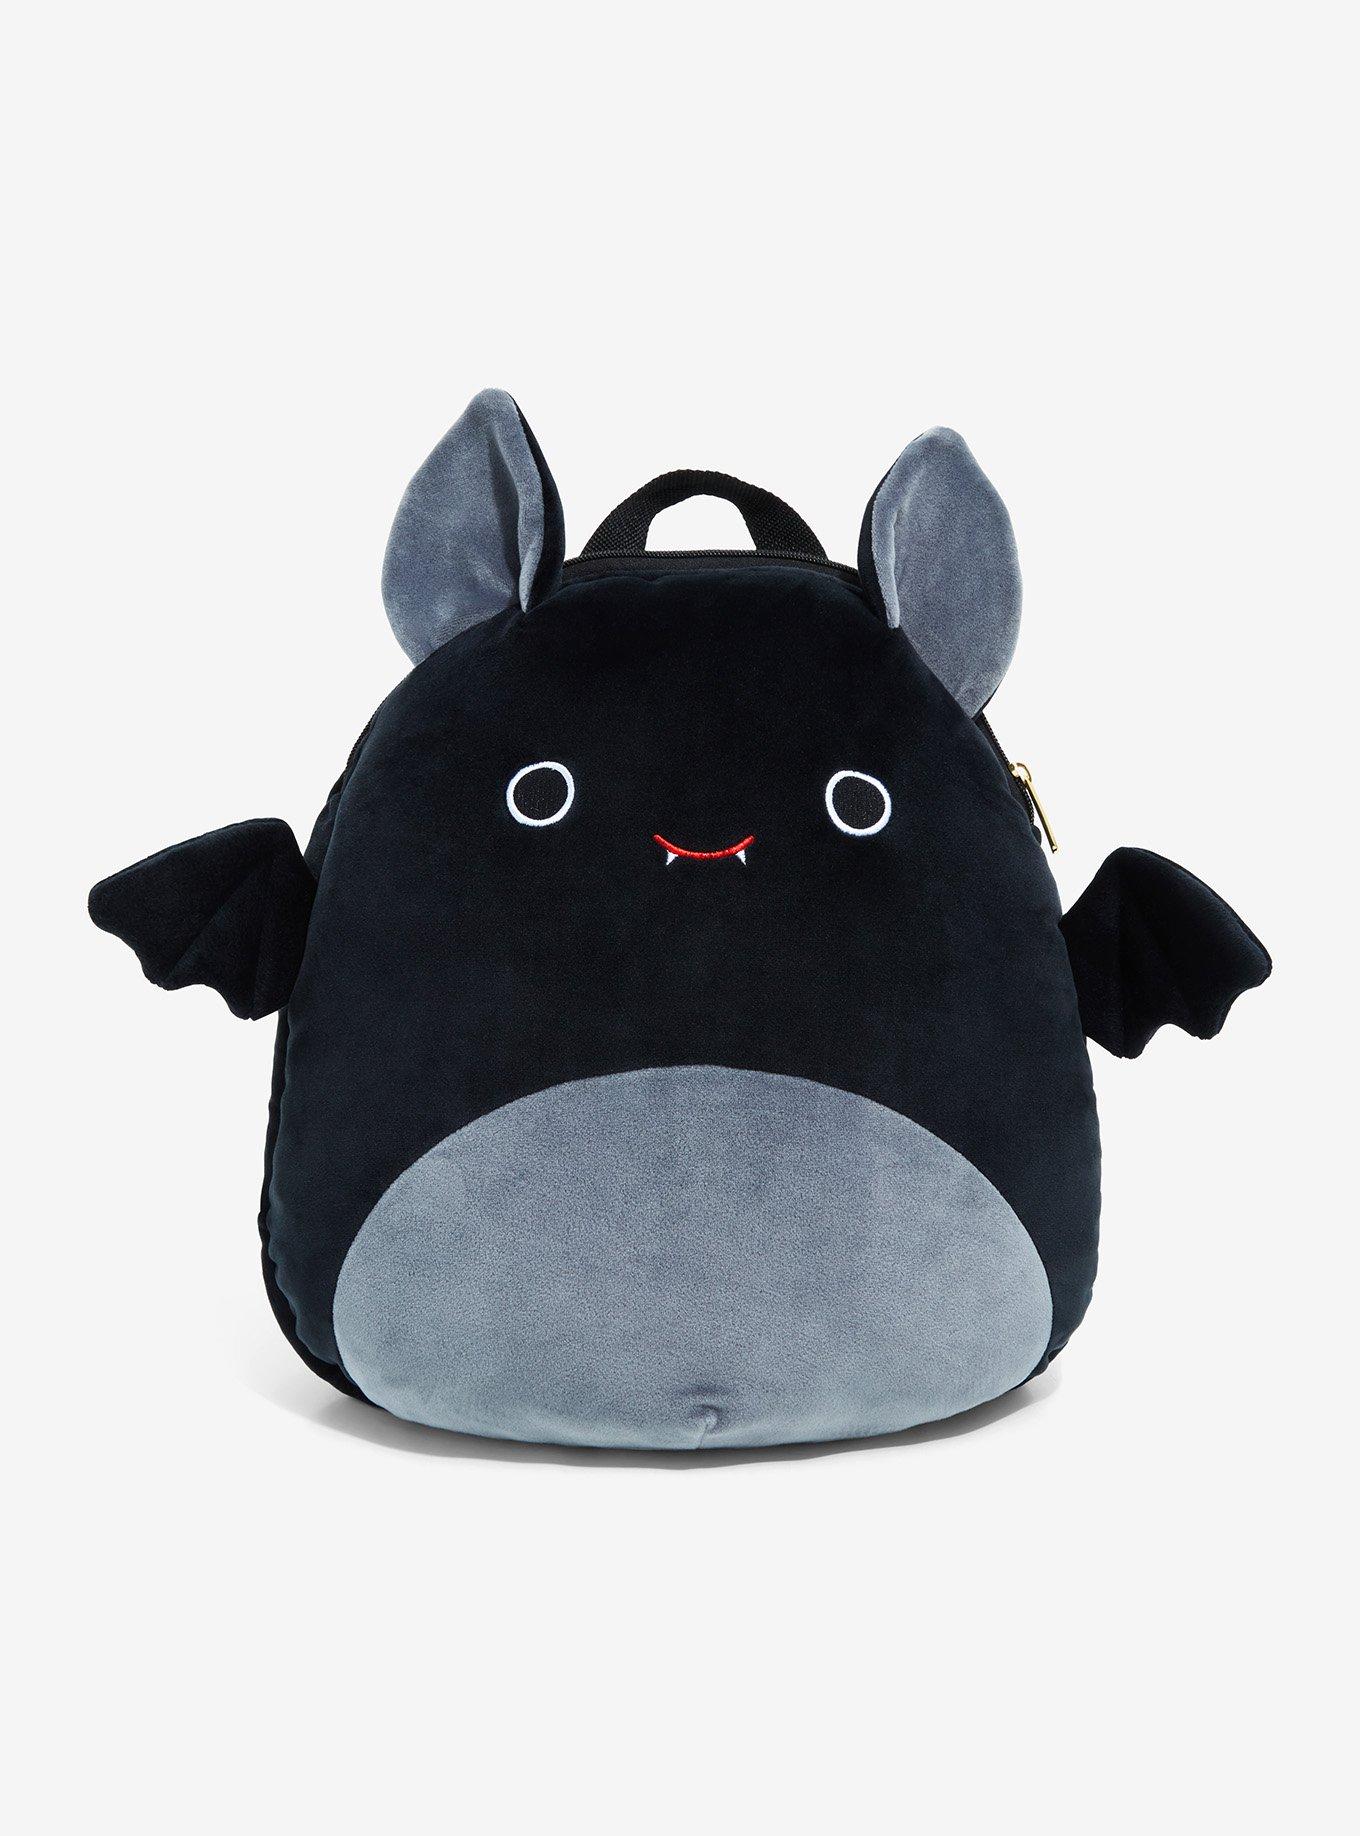 Squishmallows Emily The Bat Plush Backpack